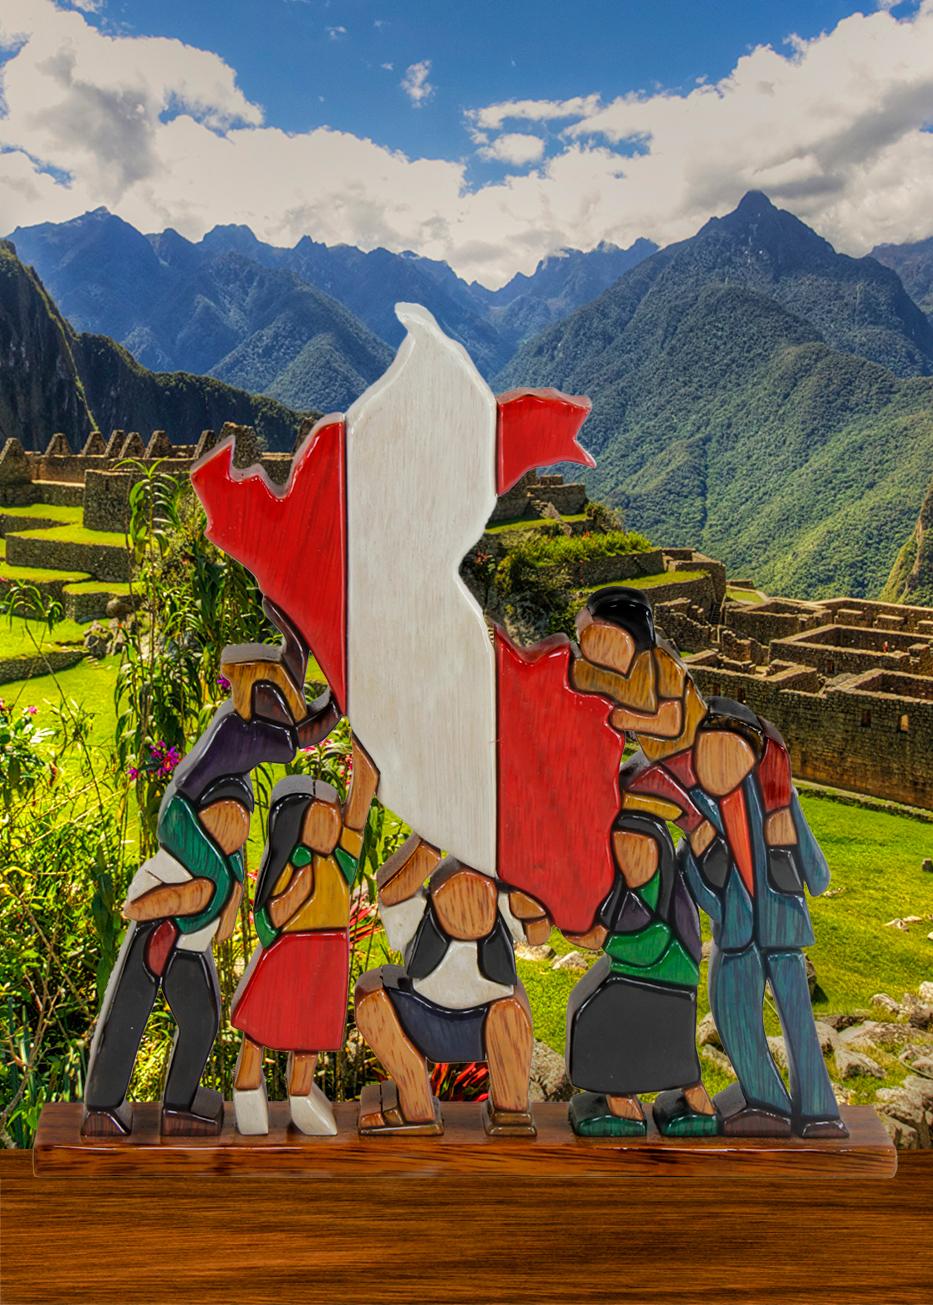 FAMILY AND PERUVIAN FLAG